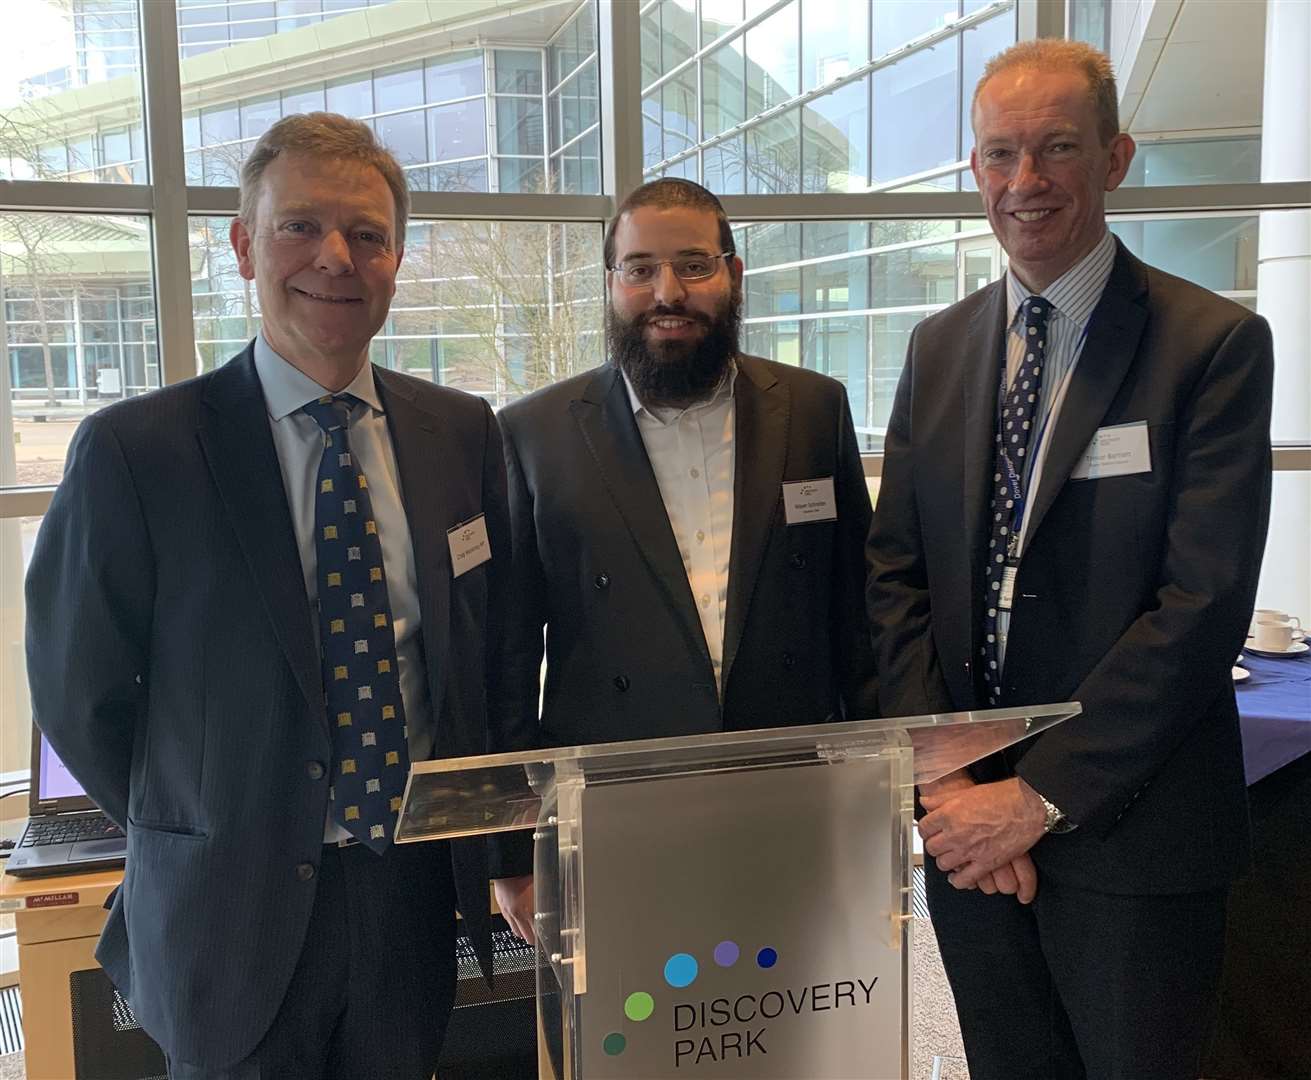 MP Craig Mackinlay, Discovery Park CEO Mayer Schreiber and Dover District Council leader Trevor Bartlett at today's announcement event